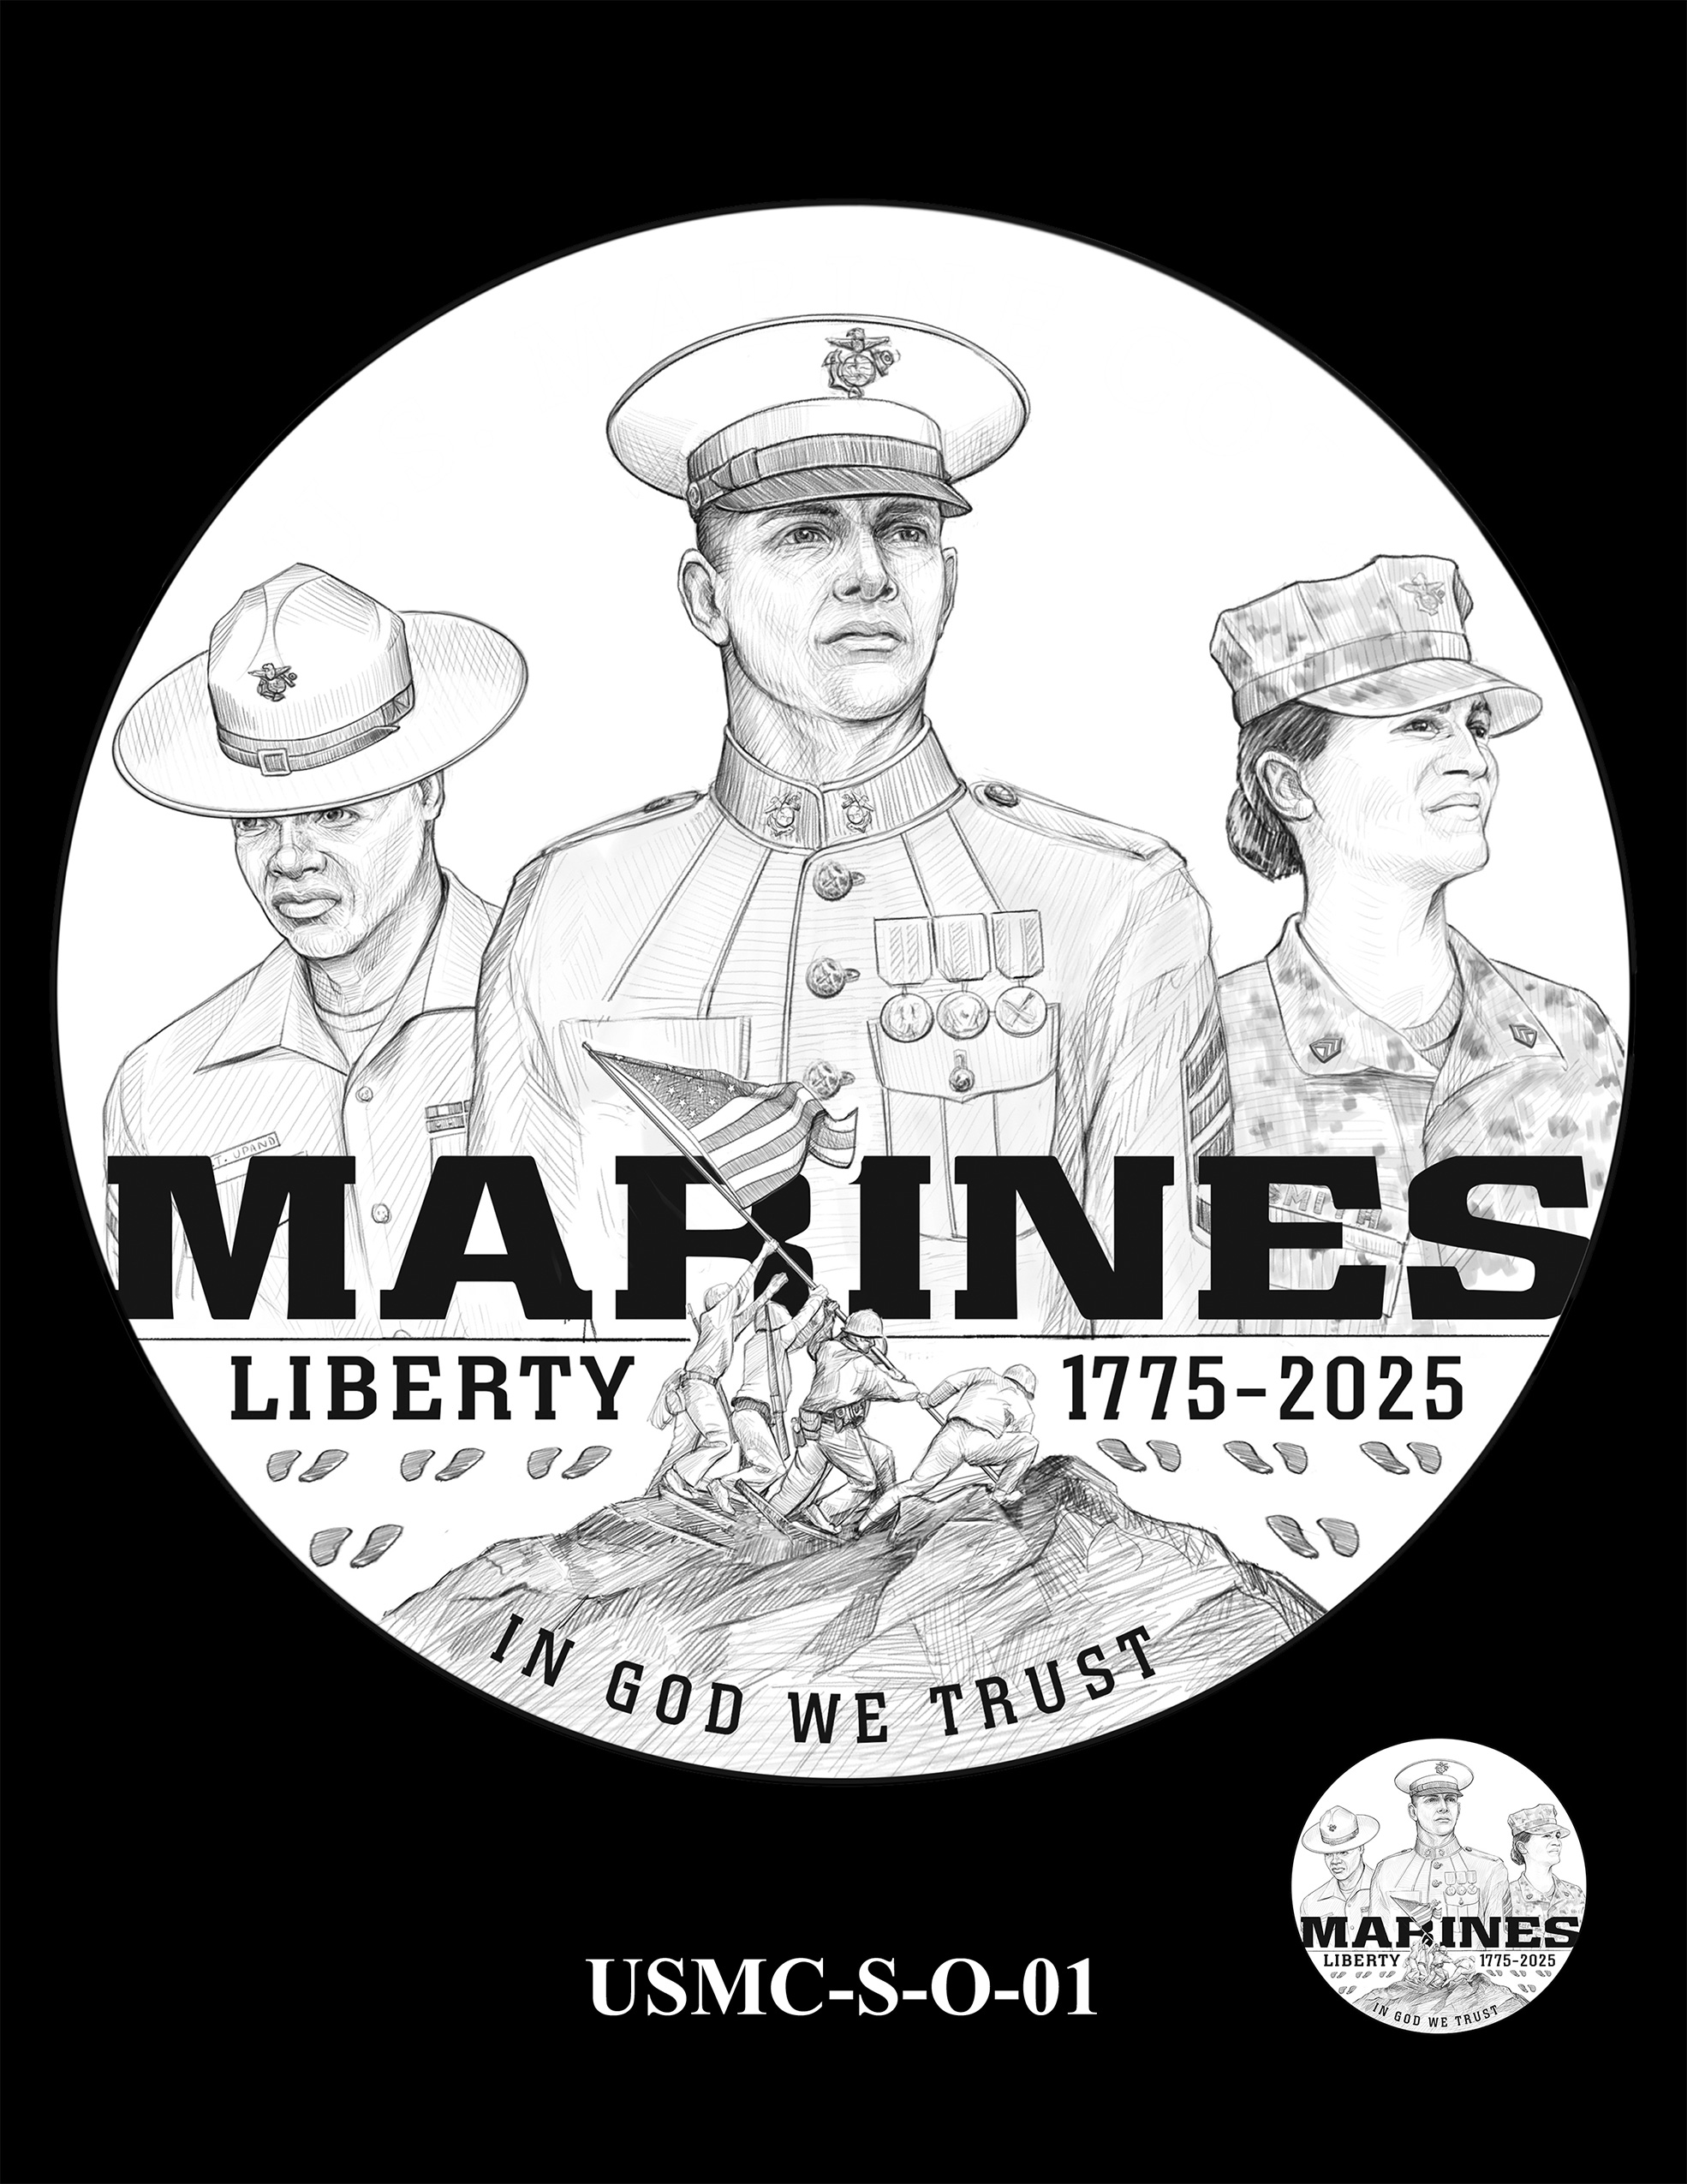 USMC-S-O-01 -- 250th Anniversary of the United States Marine Corps - Silver